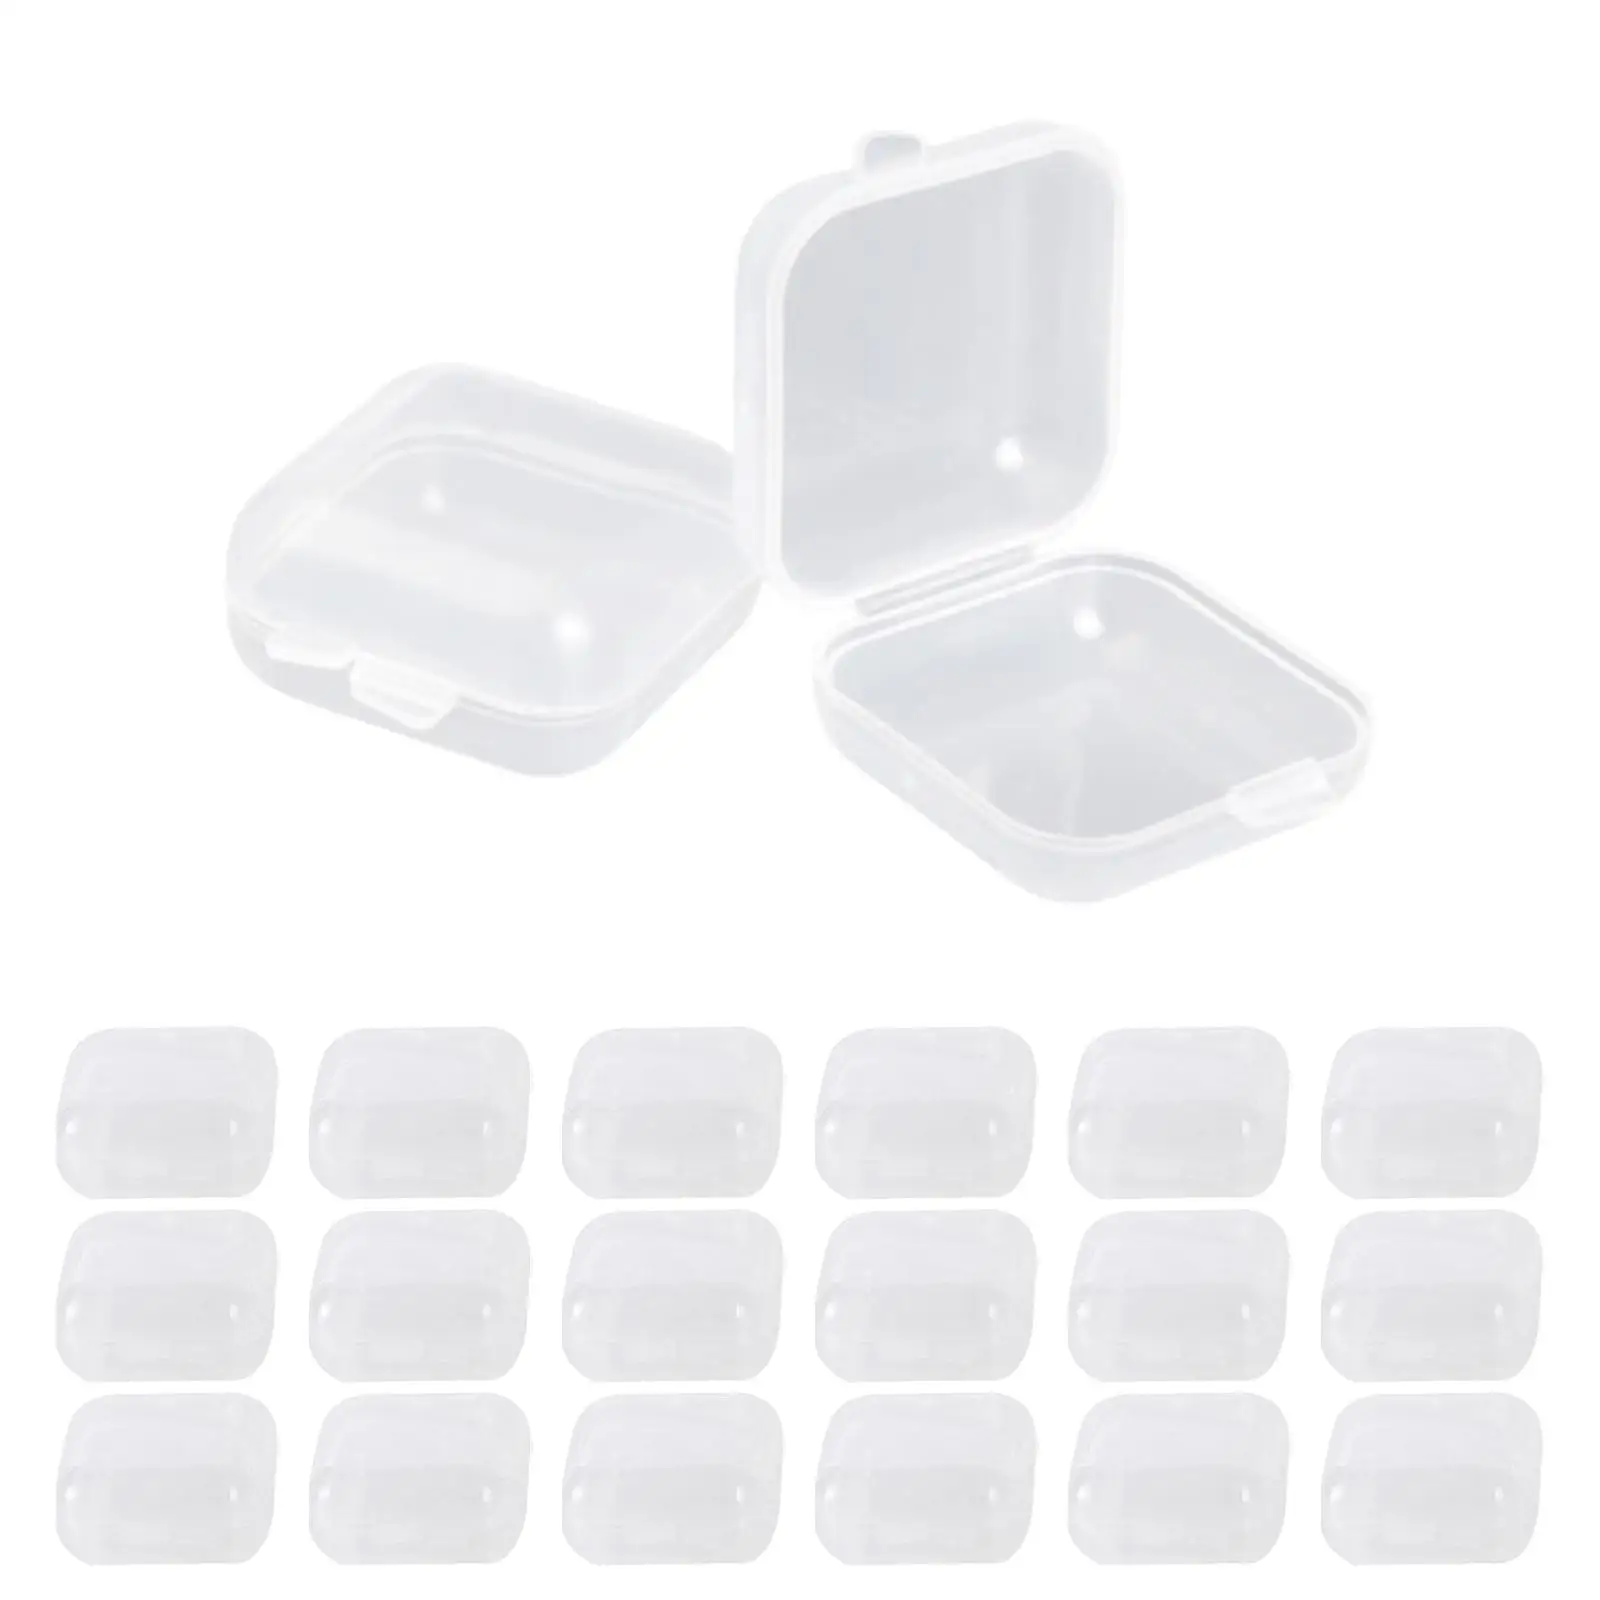 

20x Small Square Storage Containers Finishing Container Screws Sorting Box Organizer for Hardware Game Pieces Necklaces Earplugs